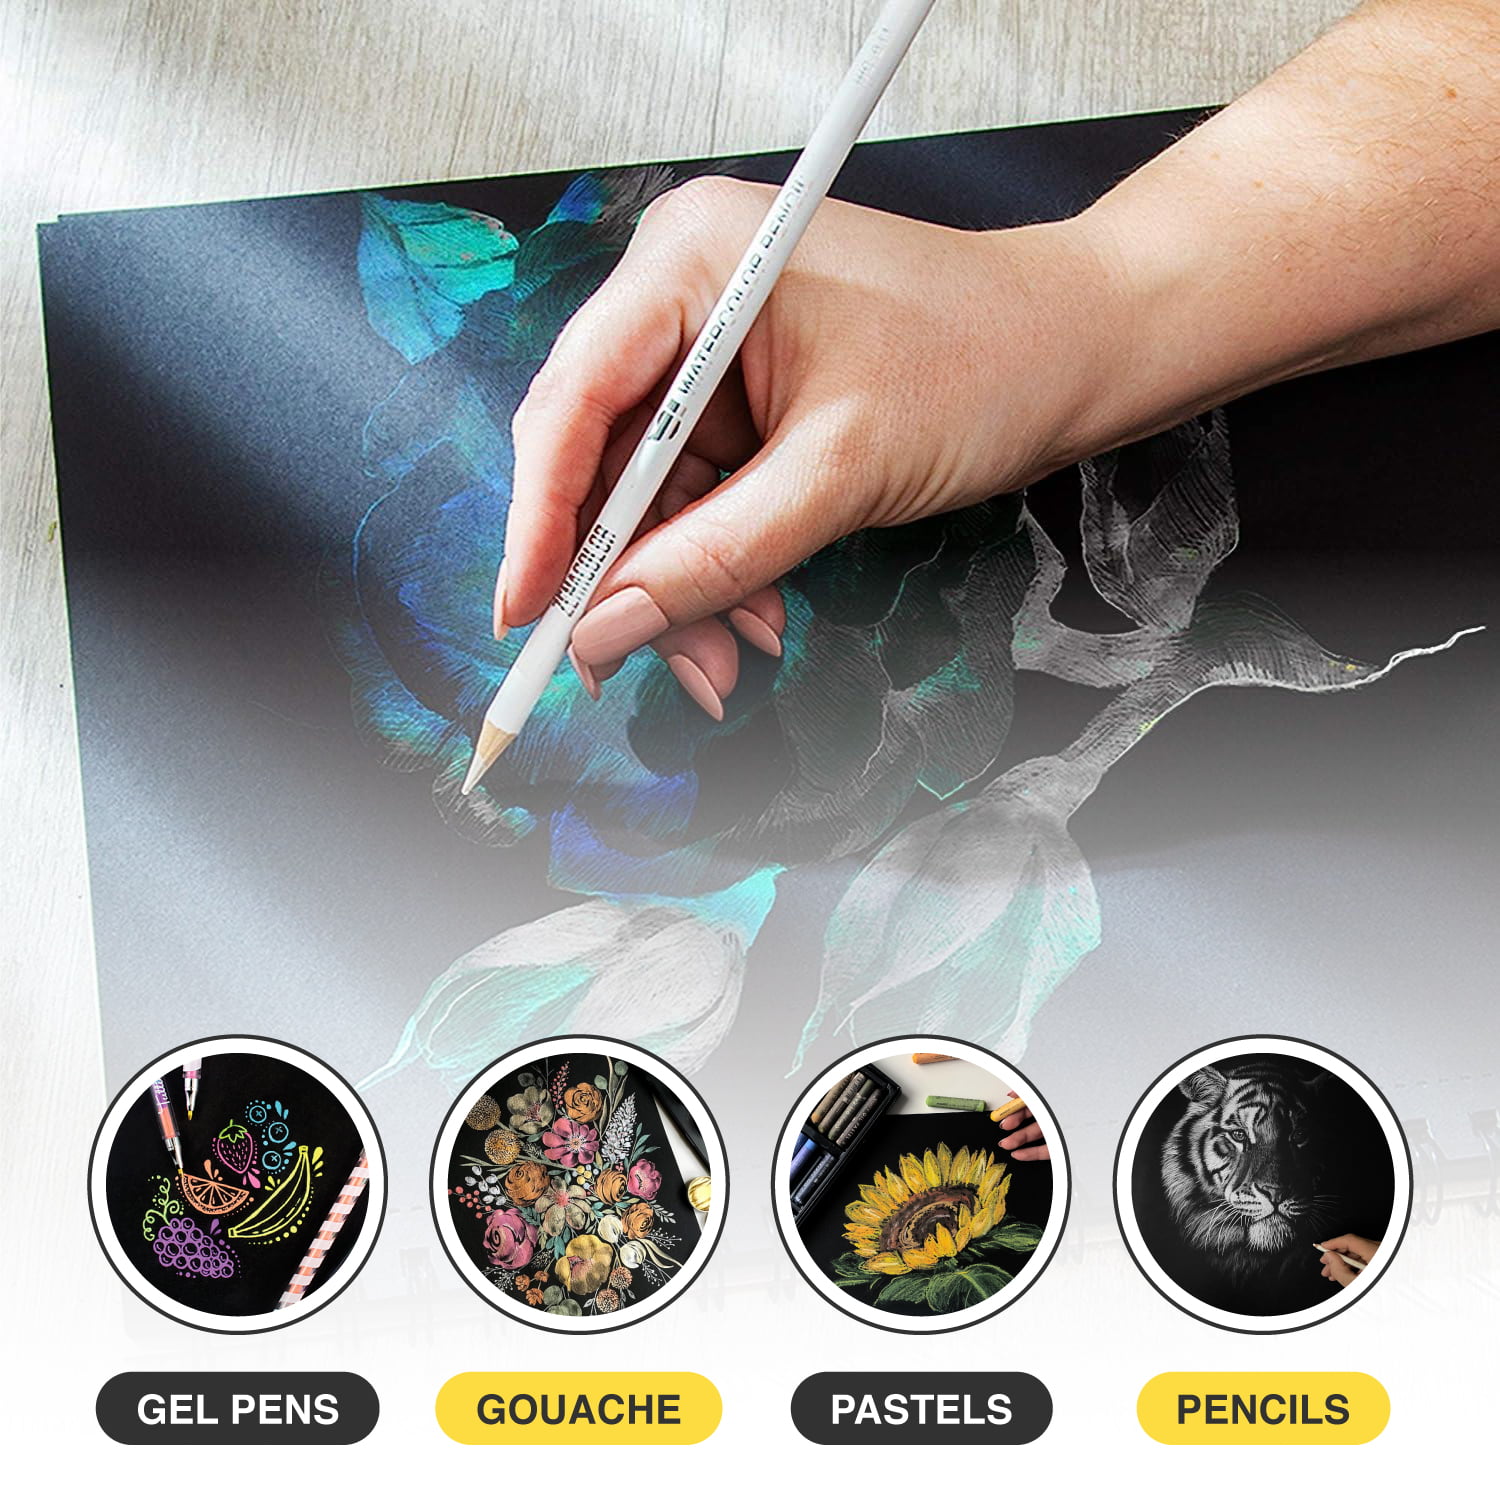 Definite Keep Smiling Acid Free Black Paper Sketch Pad A4 20 Sheets (150  GSM) with Neon Pastel Gel Pens (12 Colors) for Sketching Painting Drawing -  Black Sketch Pad and Neon Pastel Pen 